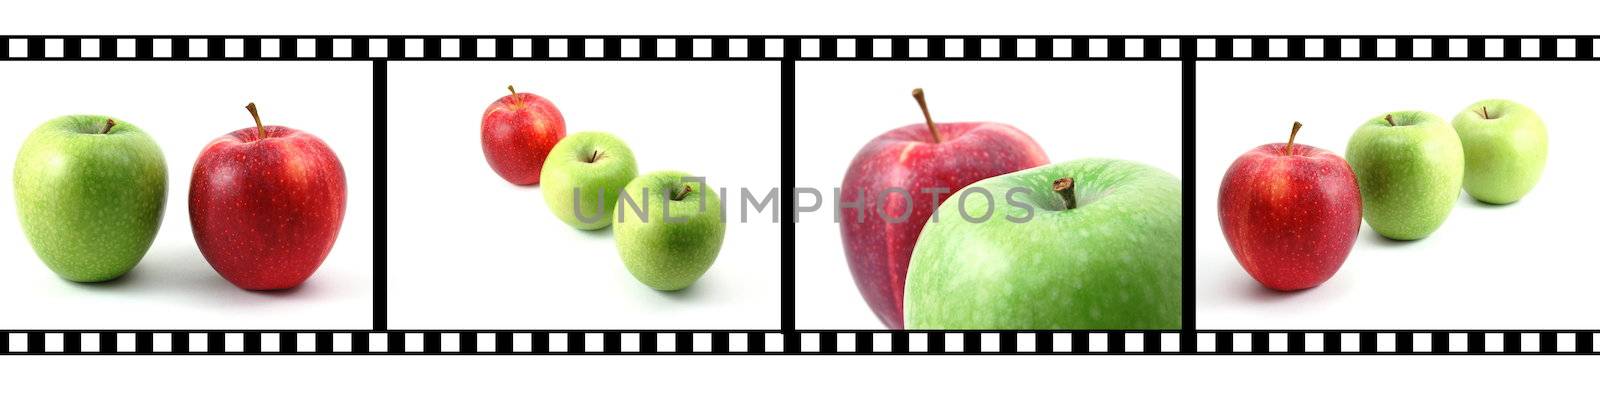 isolated fruits collection with a film strip